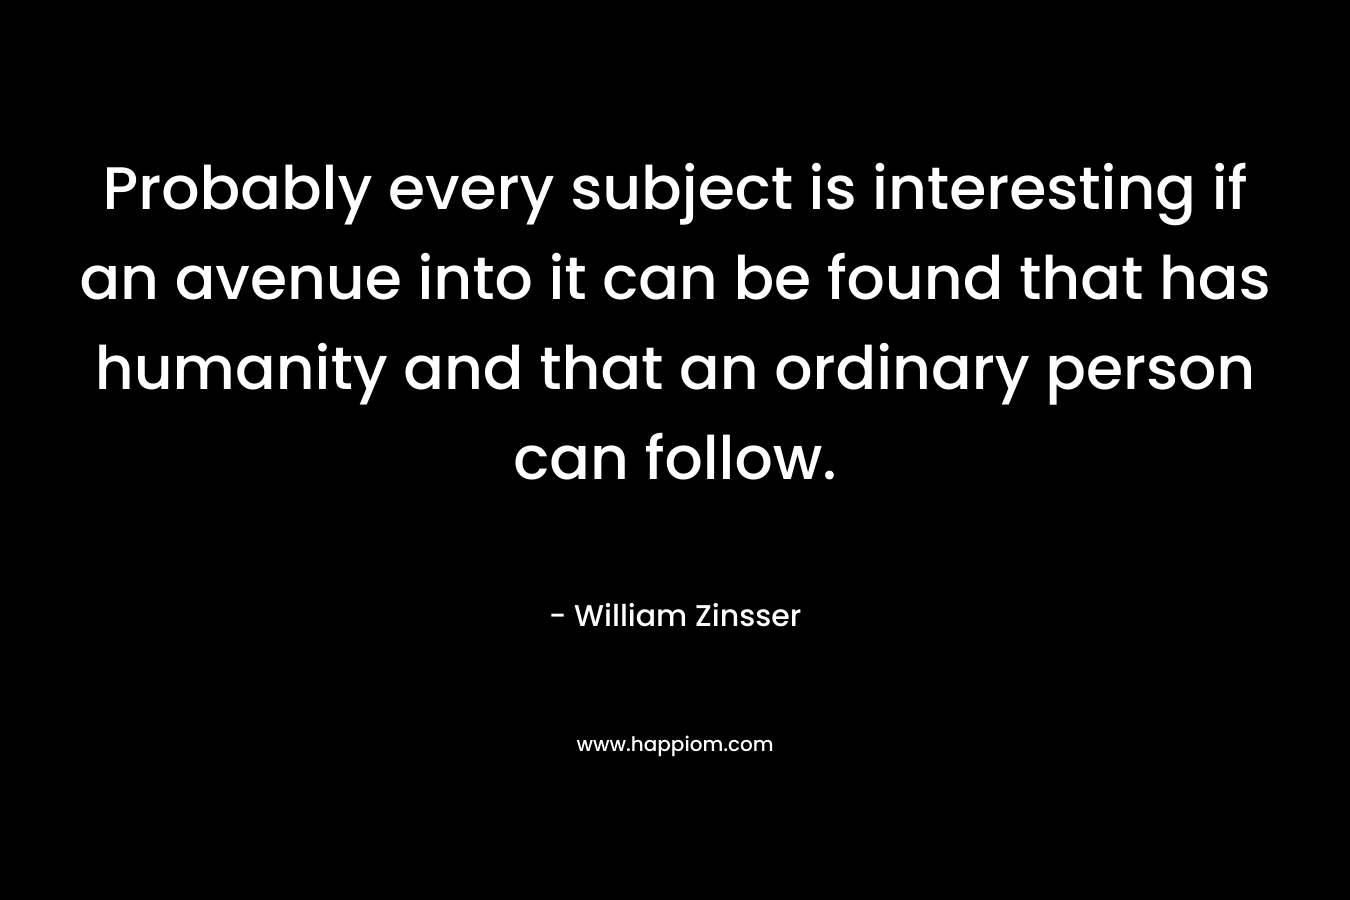 Probably every subject is interesting if an avenue into it can be found that has humanity and that an ordinary person can follow.